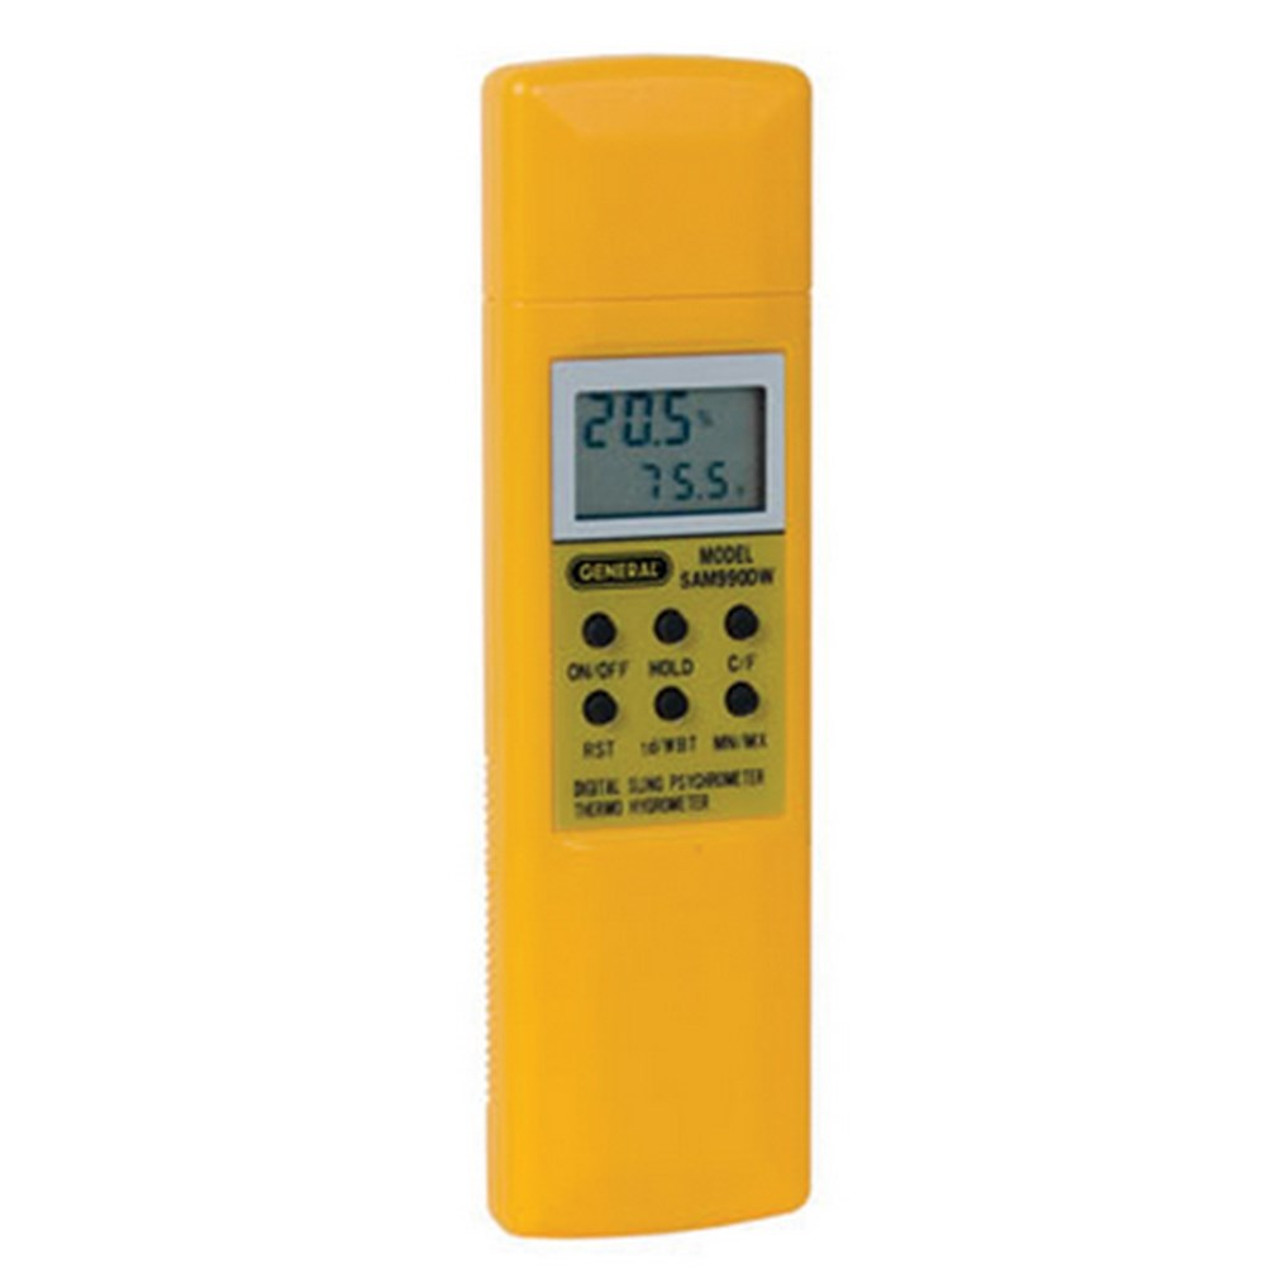 Reviews for General Tools Digital Thermo Hygrometer Psychrometer